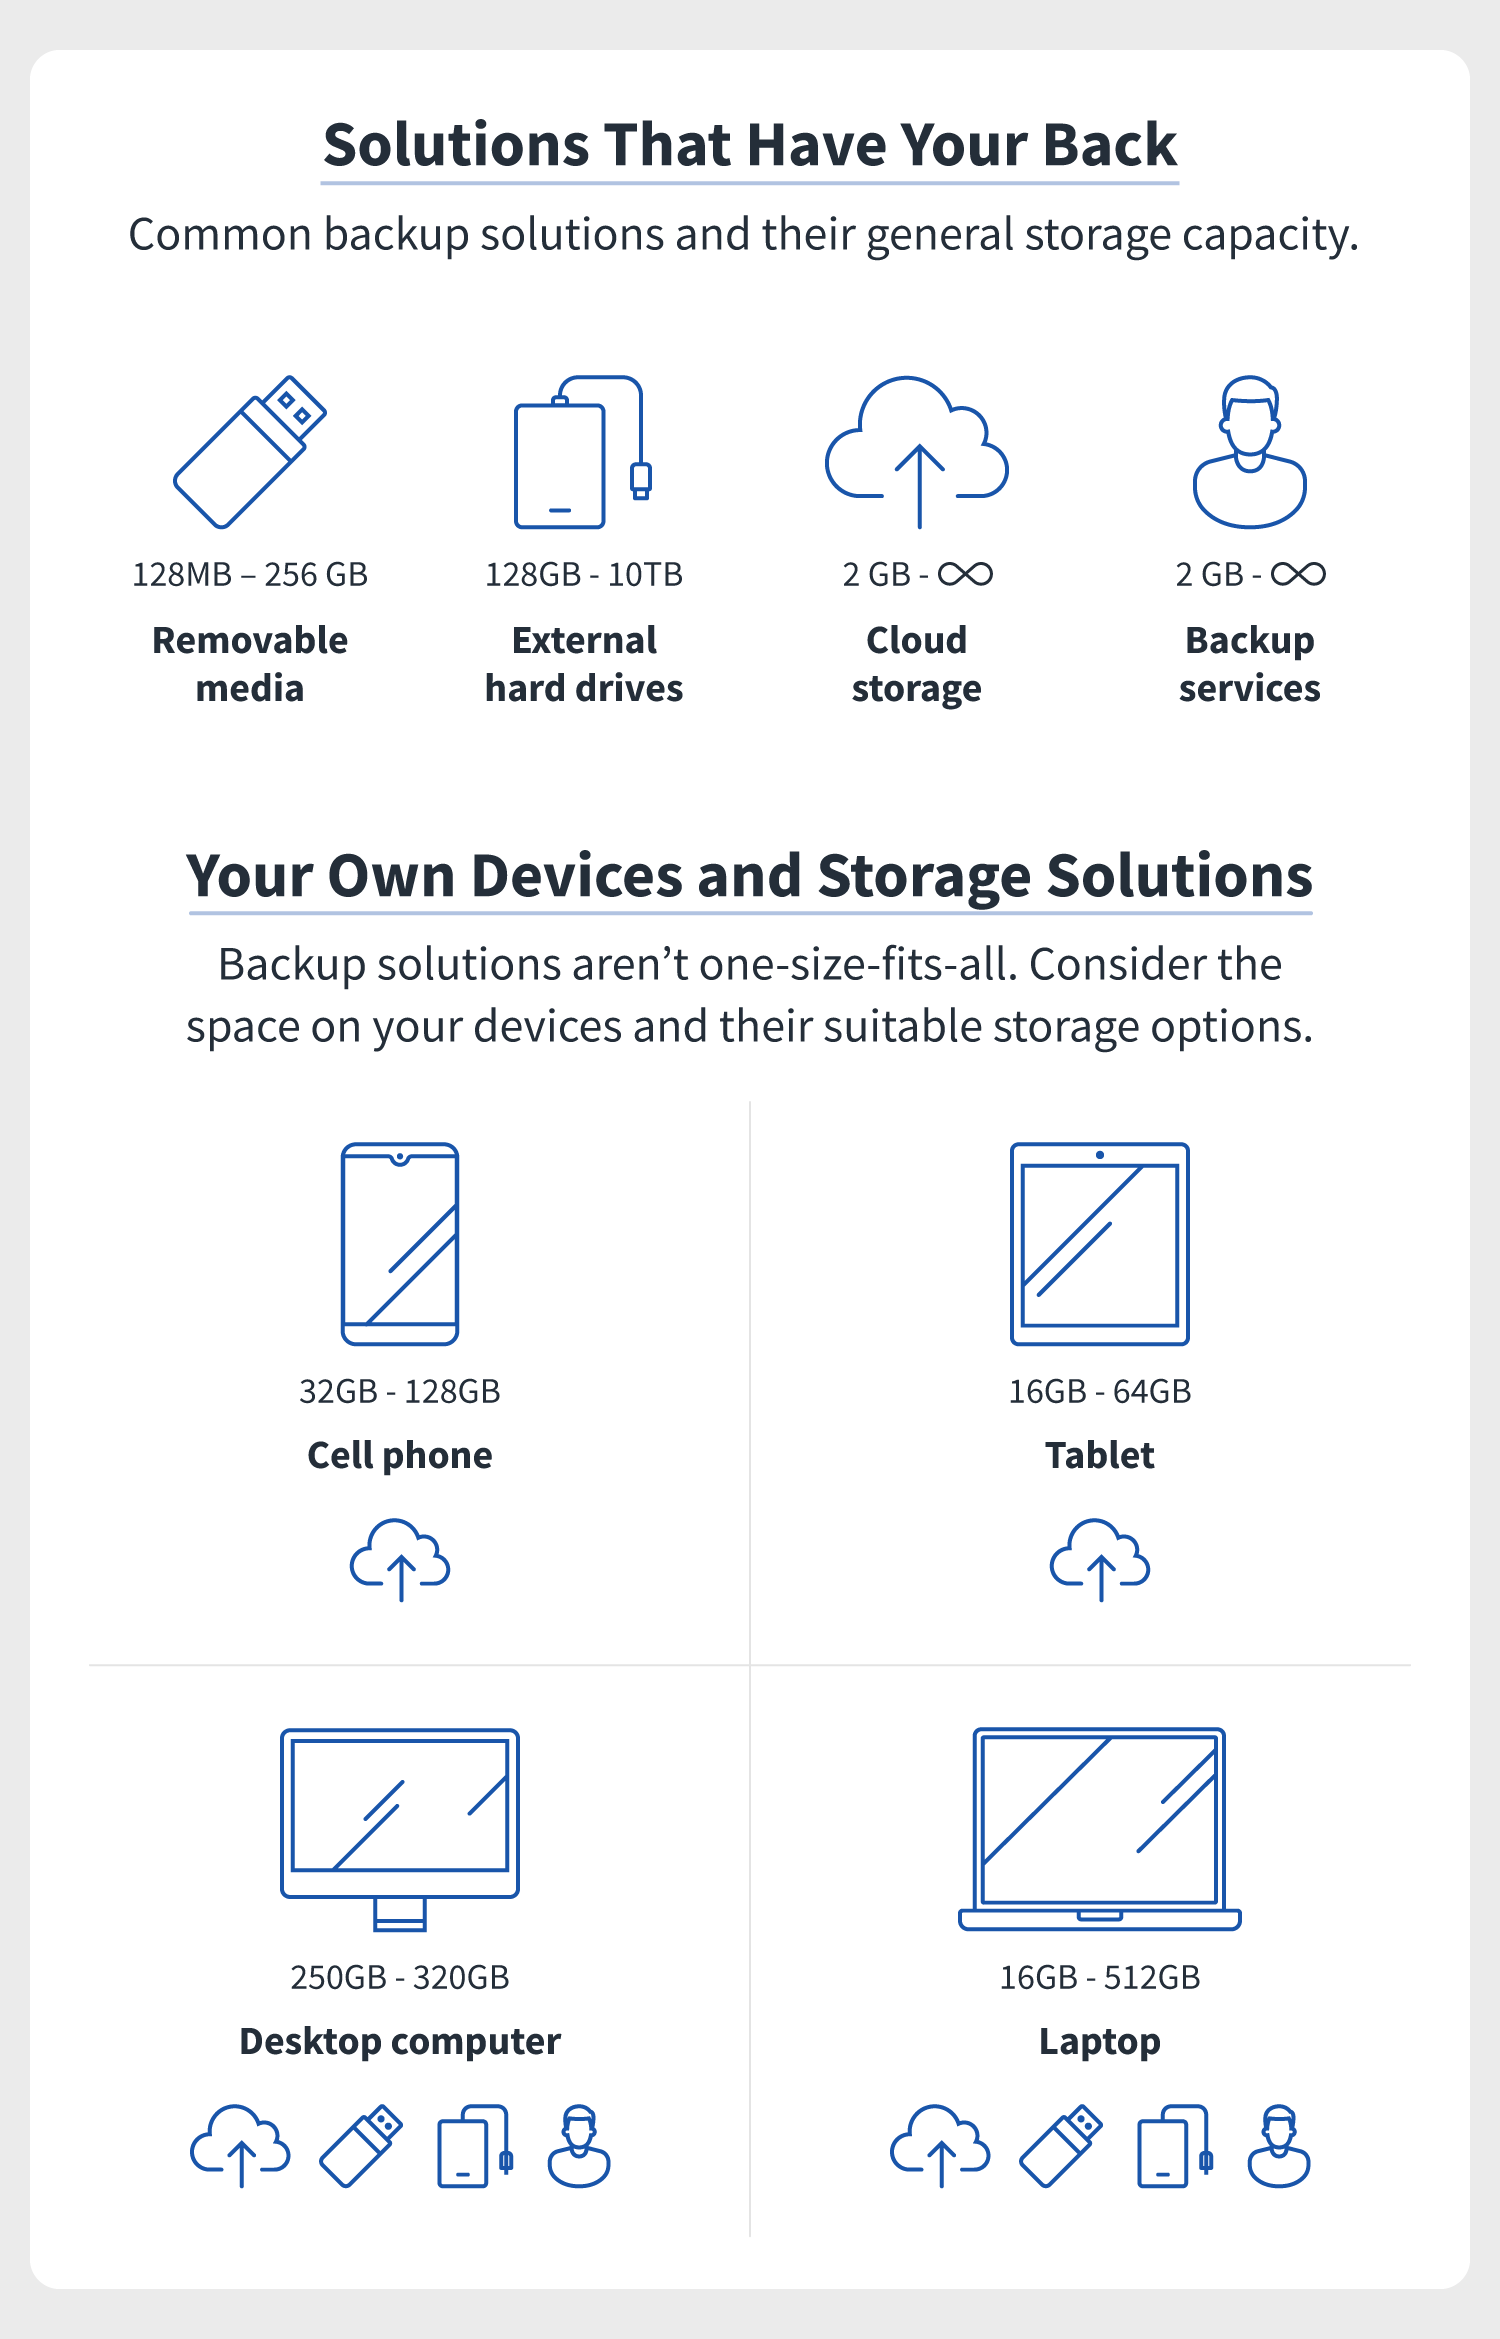 four common data backup solutions and their storage capacities